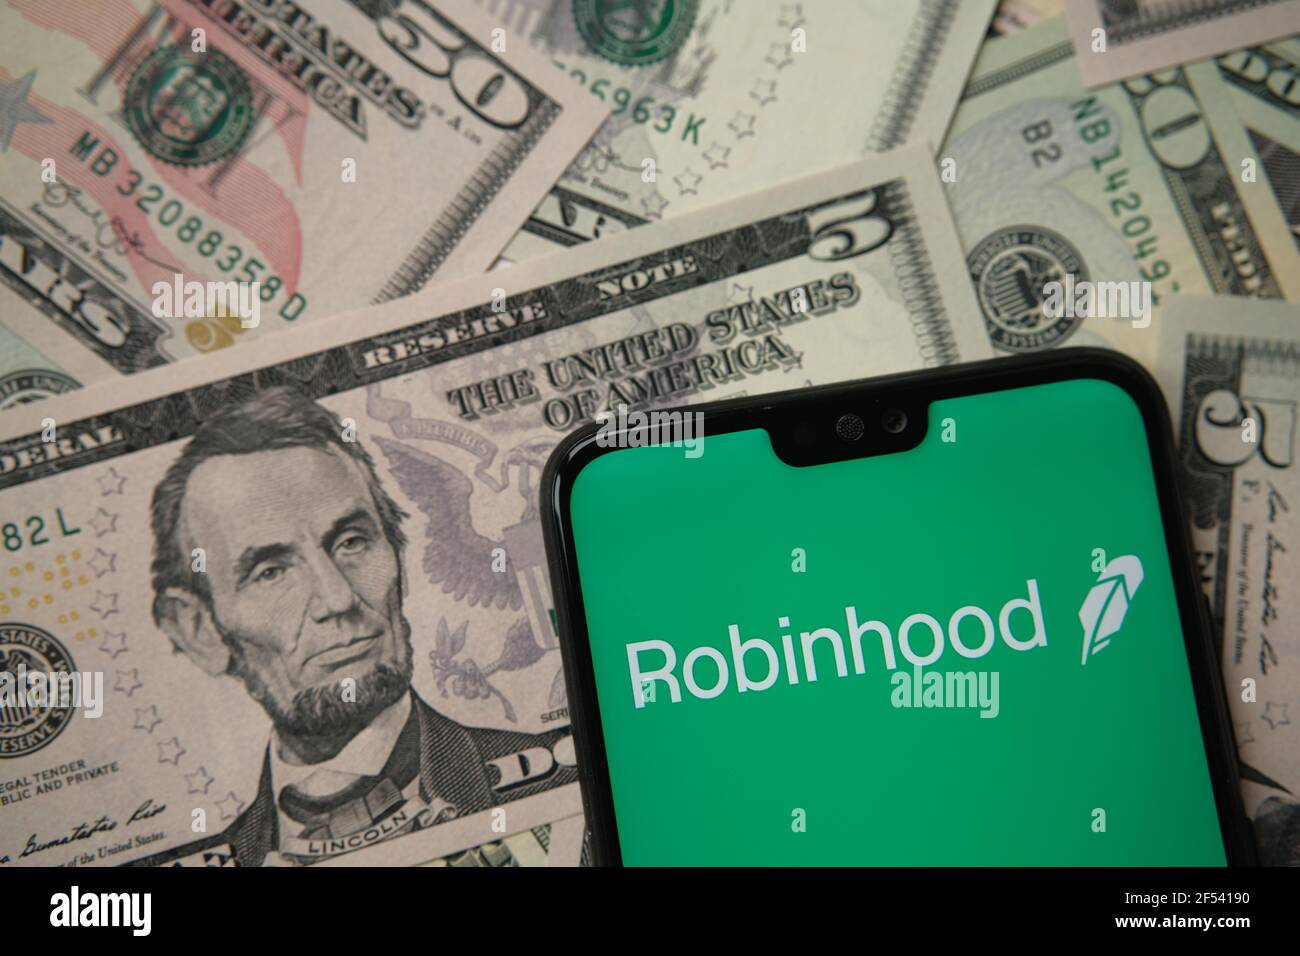 Robinhood app logo seen on smartphone on US dollar banknotes. Robinhood is an investing and trading app for shares, stocks and crypto currency. Staffo Stock Photo